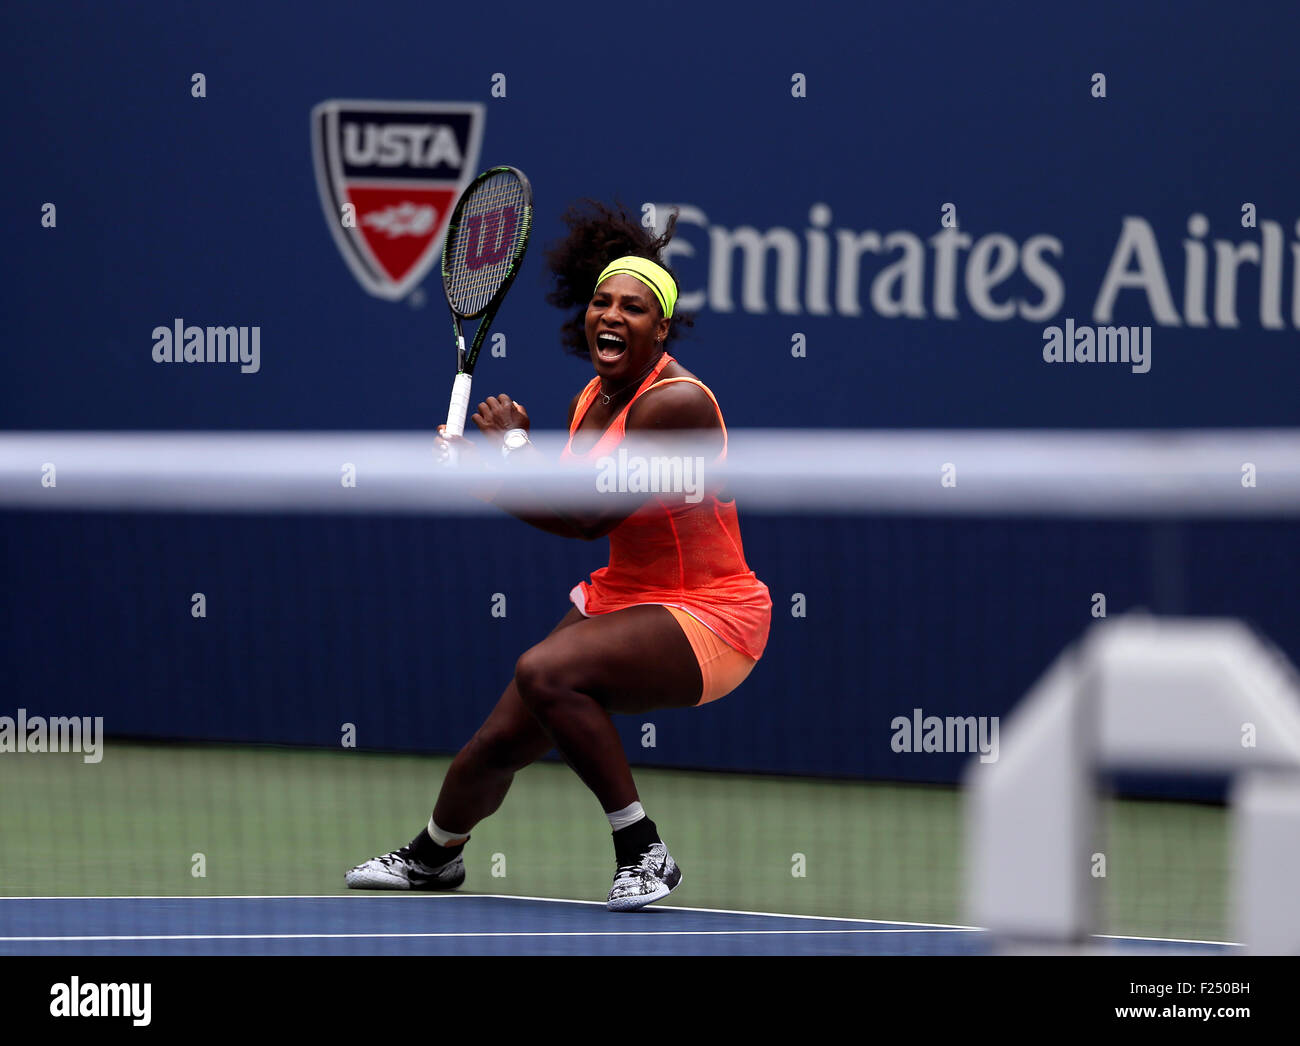 Flushing Meadows, New York, USA. 11th Sep, 2015. Serena Williams returns a shot to Roberta Vinci of Italy in their semifinal match at the U.S. Open in Flushing Meadows, New York on the afternoon of September 11th, 2015.  Vinci won the match 2-6, 6-4, 6-4, thwarting Williams bid for a Grand Slam. Credit:  Adam Stoltman/Alamy Live News Stock Photo